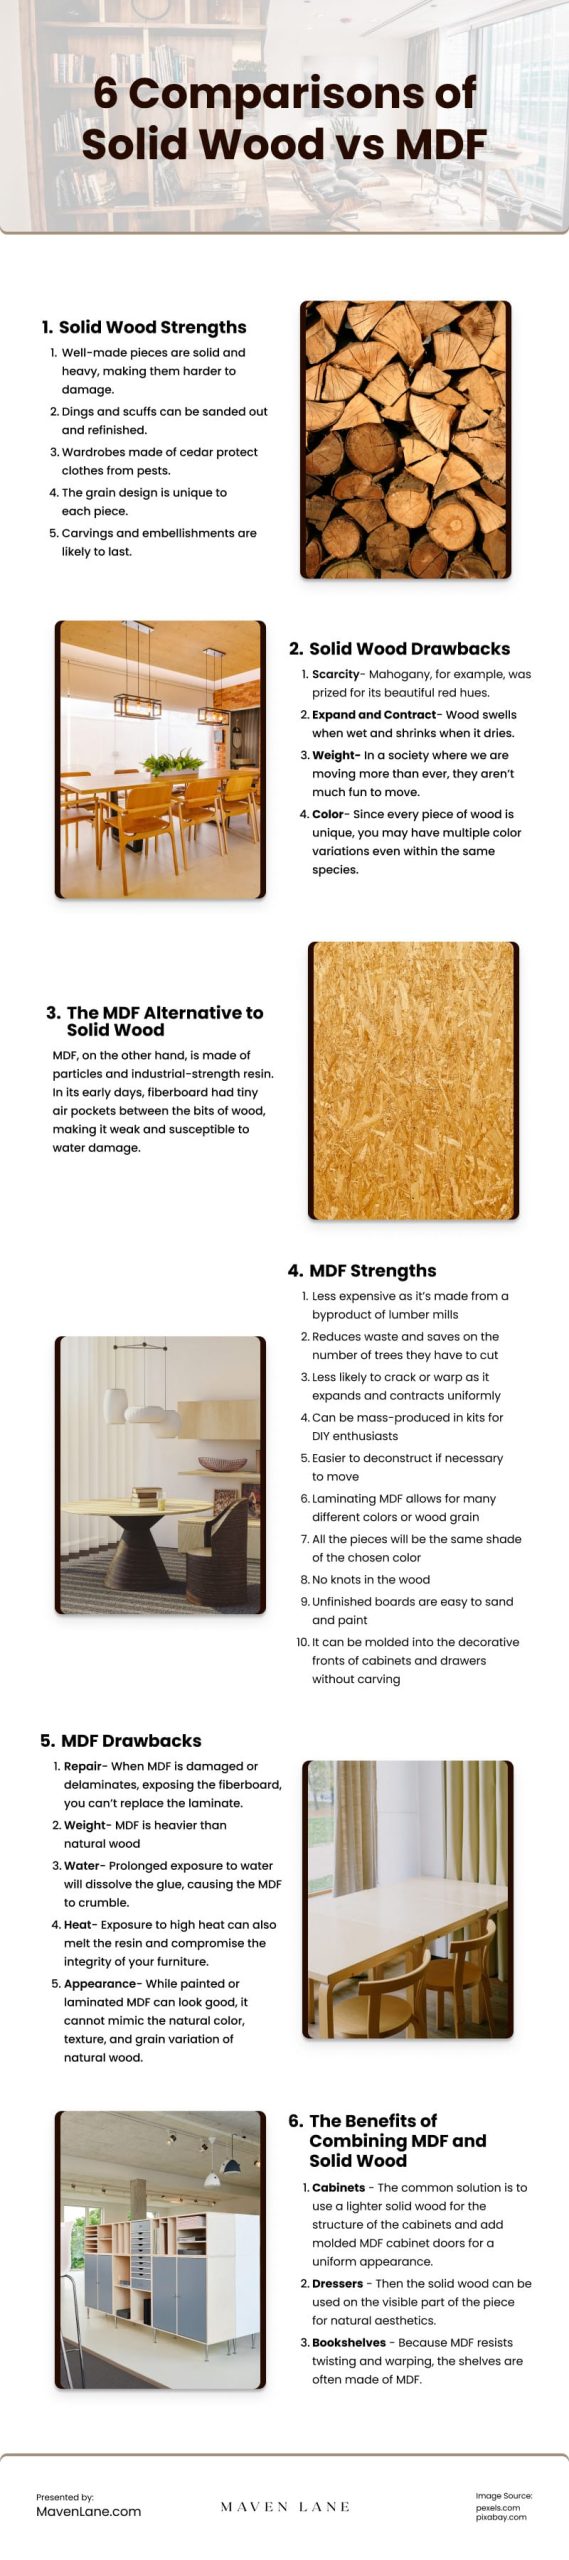 6 Comparisons of Solid Wood vs MDF Infographic